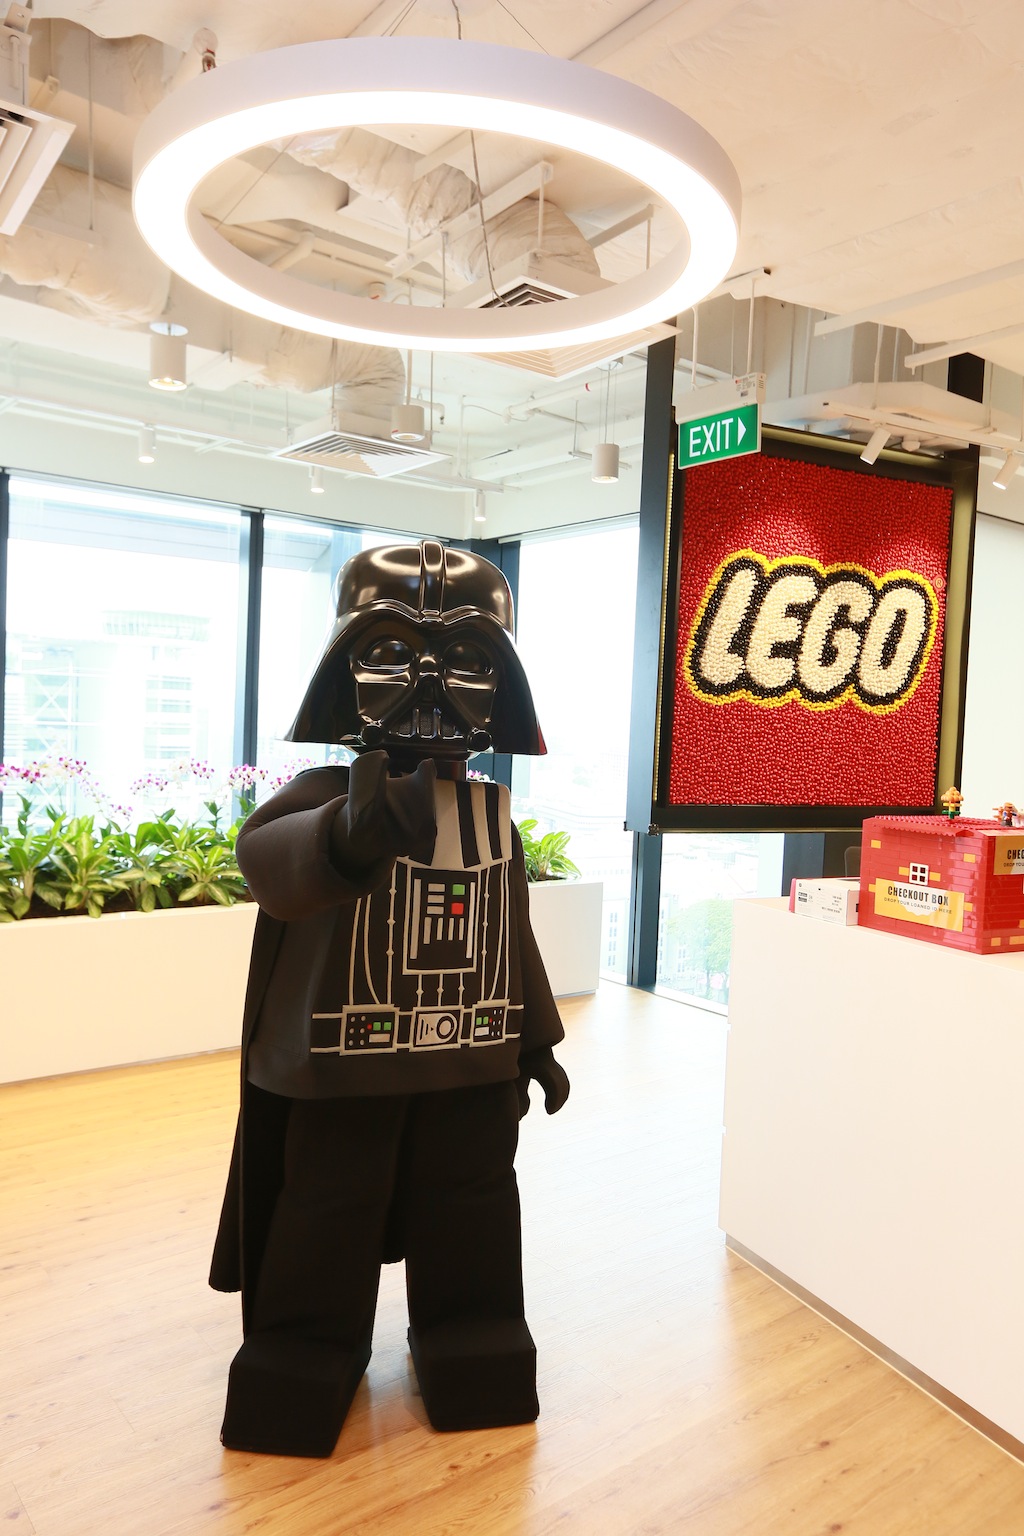 09-Master-Your-Force-Together-with-LEGO-Darth-Vader-at-LEGOLAND-Malaysia.jpg